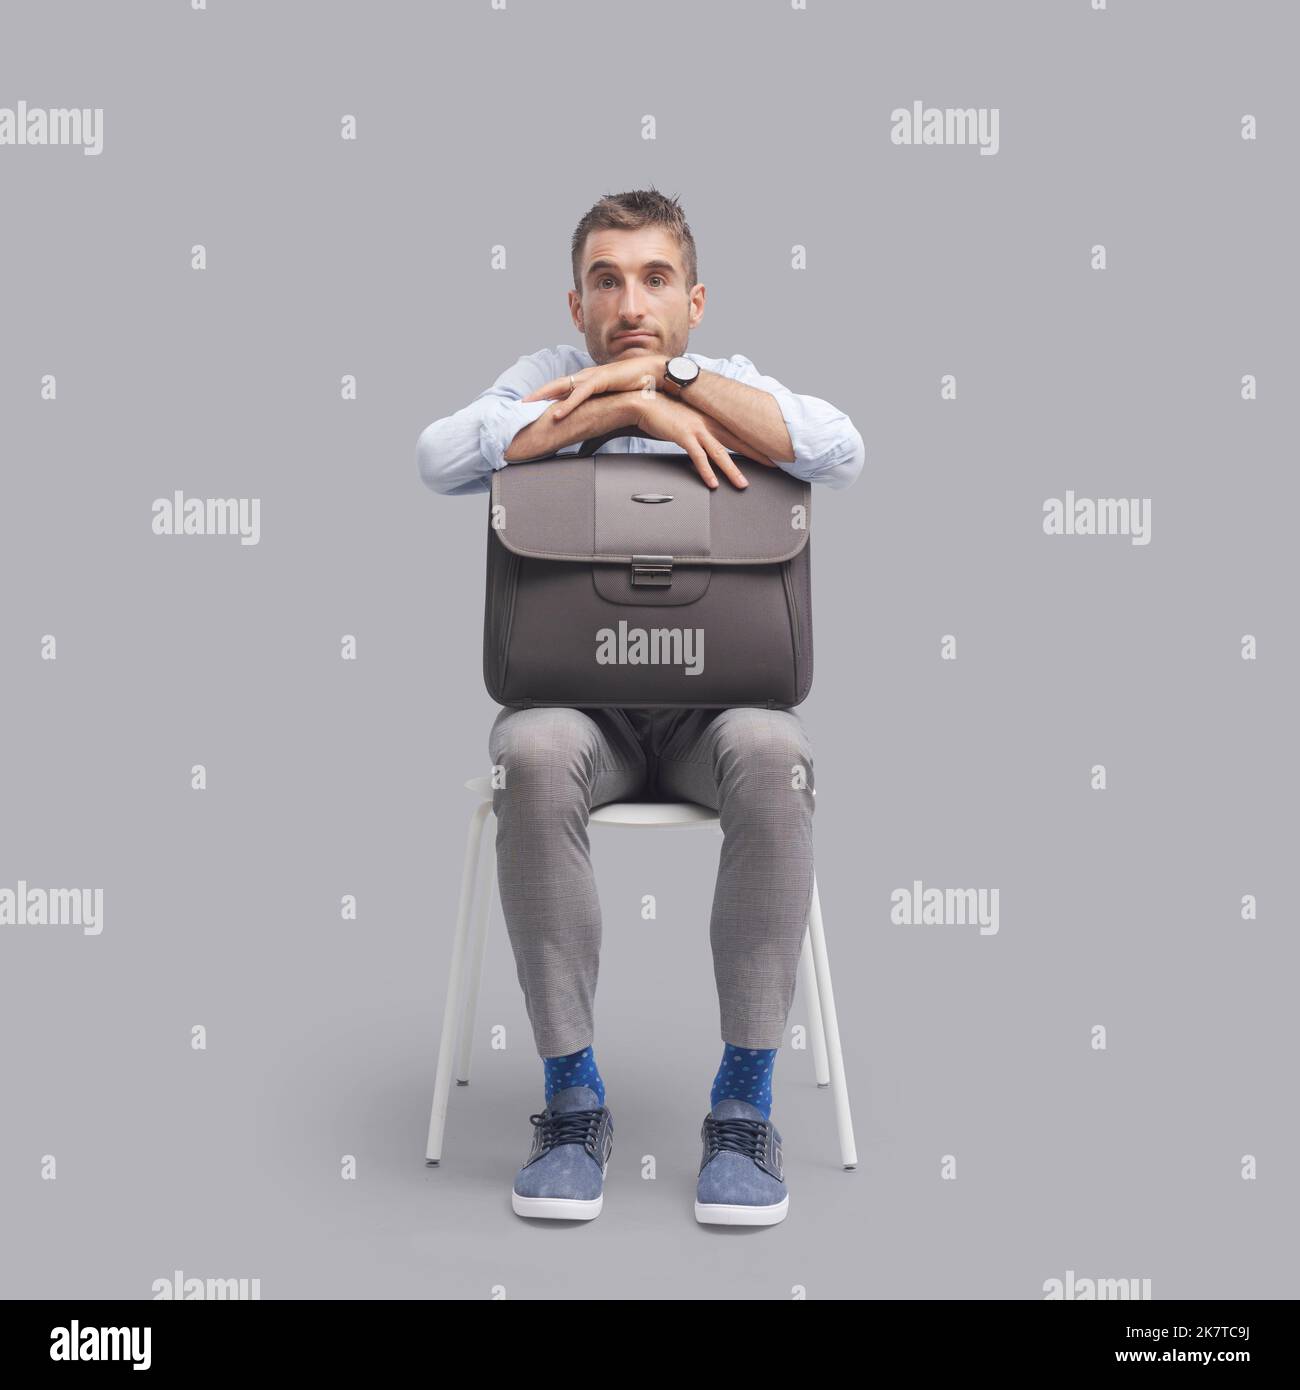 Bored man sitting on a chair and waiting for a meeting or a job interview Stock Photo